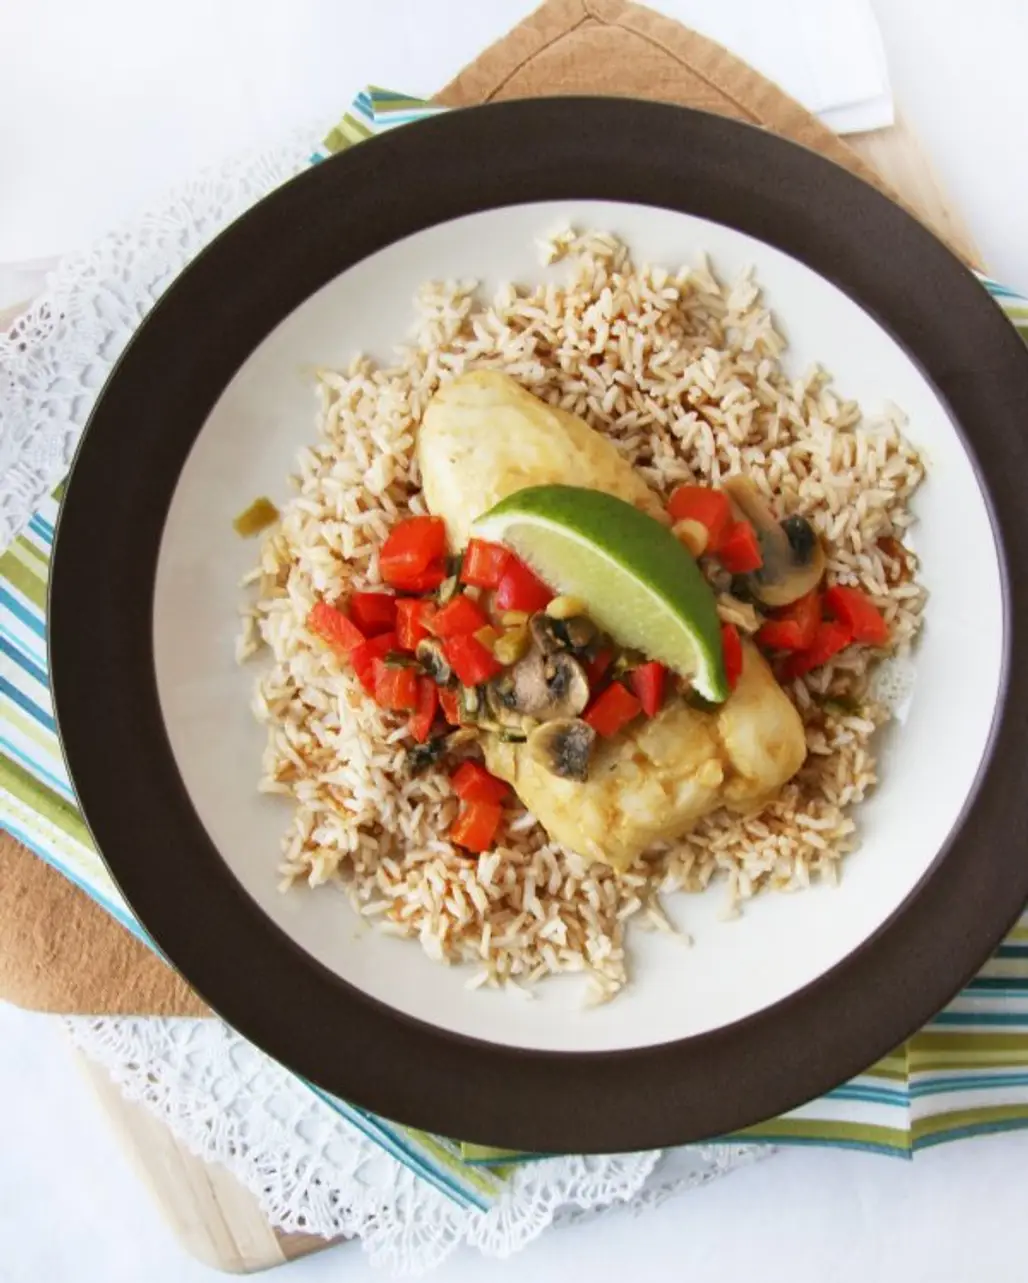 Pair a White Fish Fillet with Brown Rice and Steamed Veggies